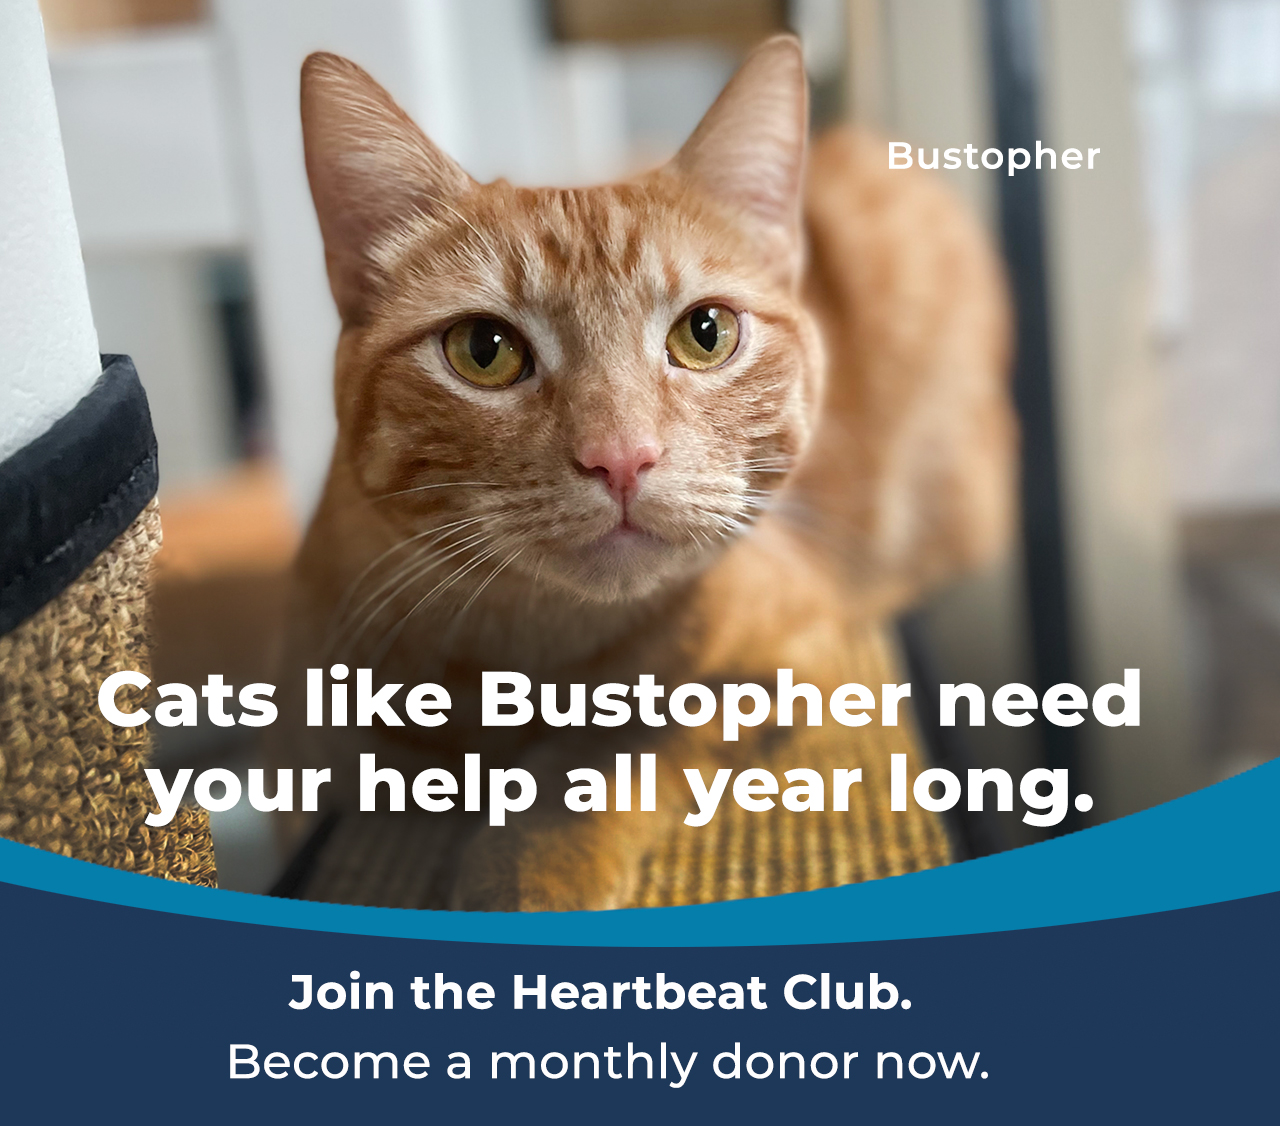 Join the Heartbeat Club. Become a monthly donor now.